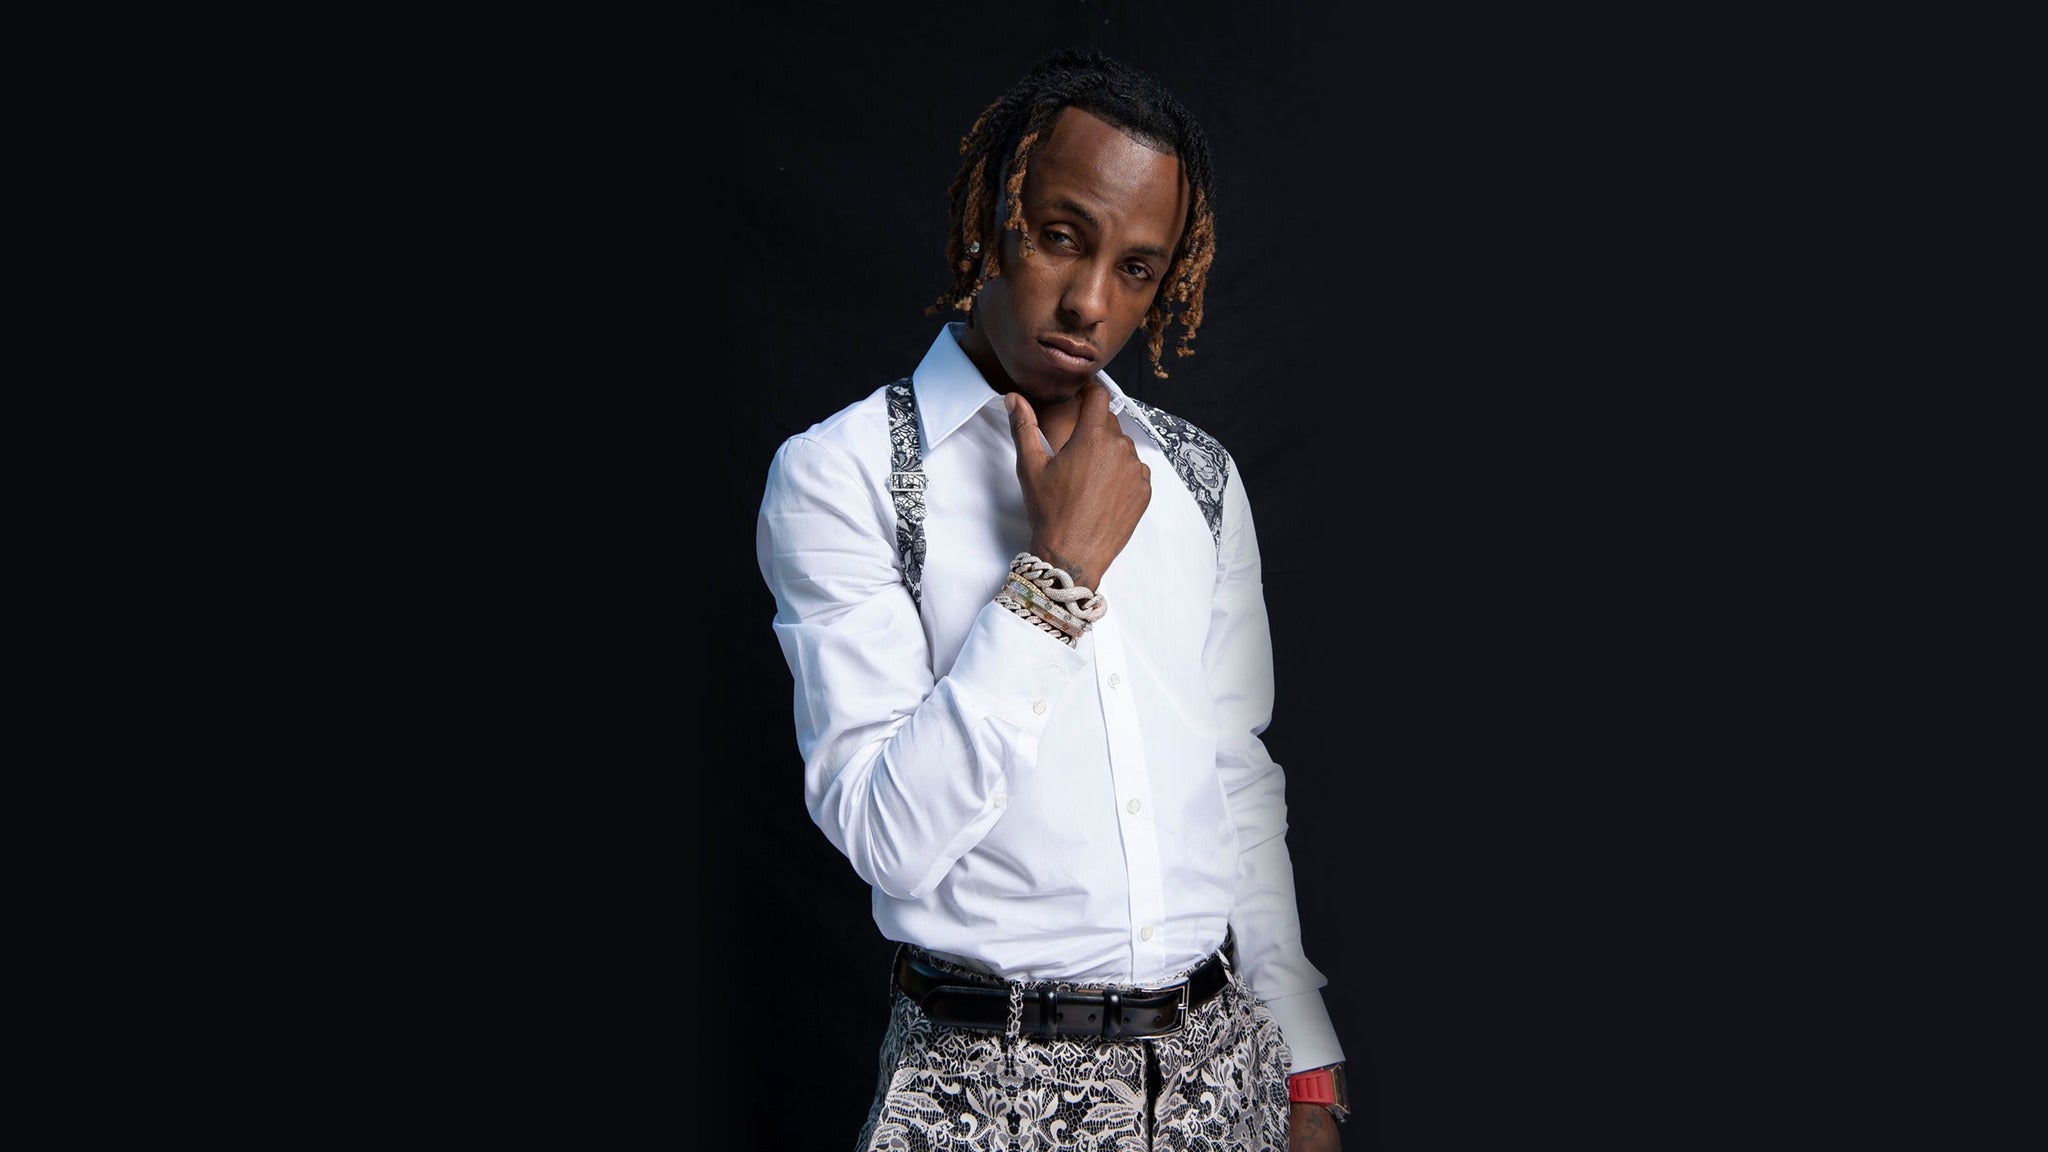 Rich The Kid: The World Is Yours 2 Tour in Cincinnati promo photo for Ticketmaster presale offer code